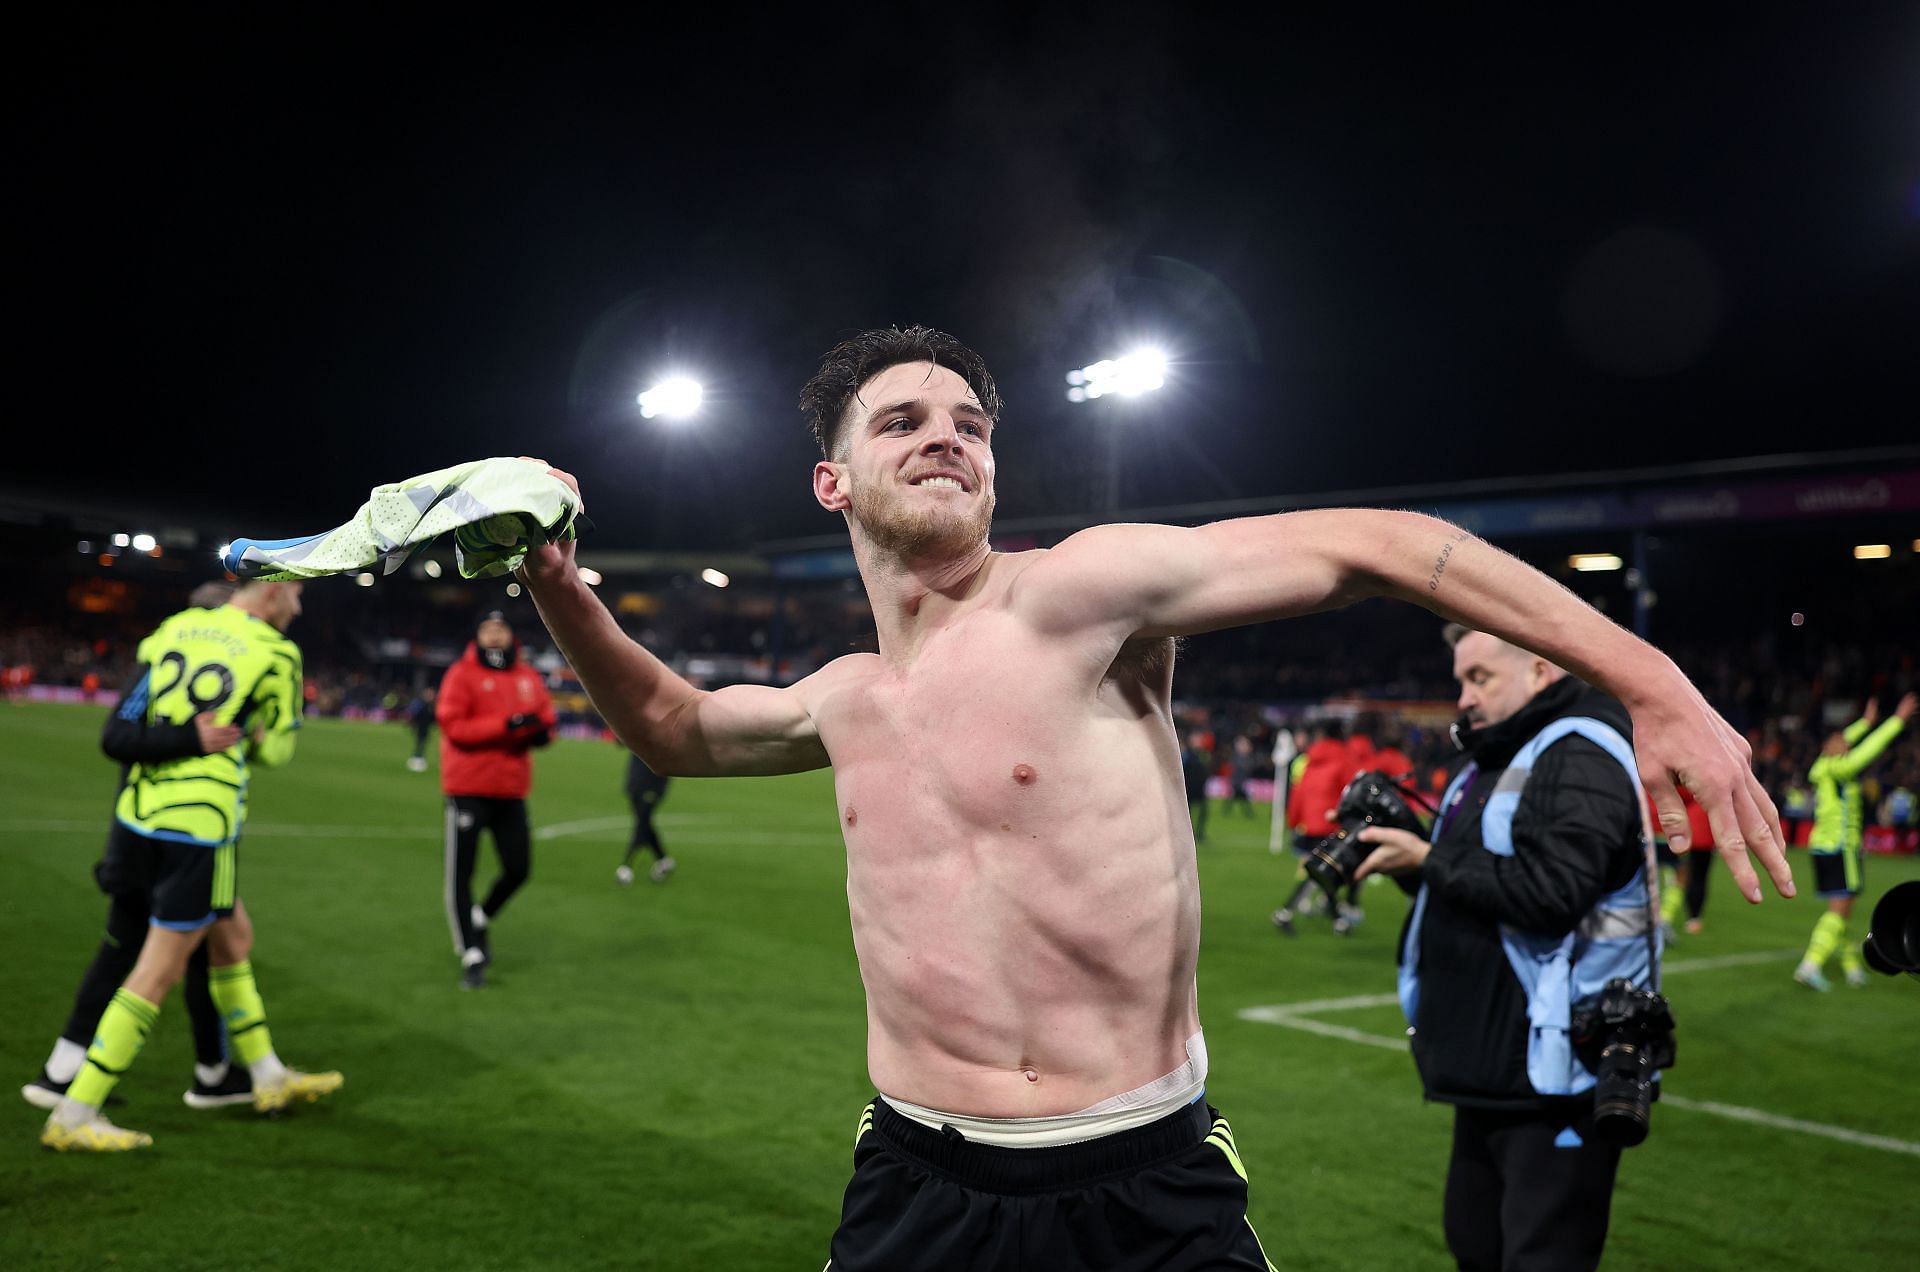 Declan Rice is already a fan favorite among the Emirates faithful.